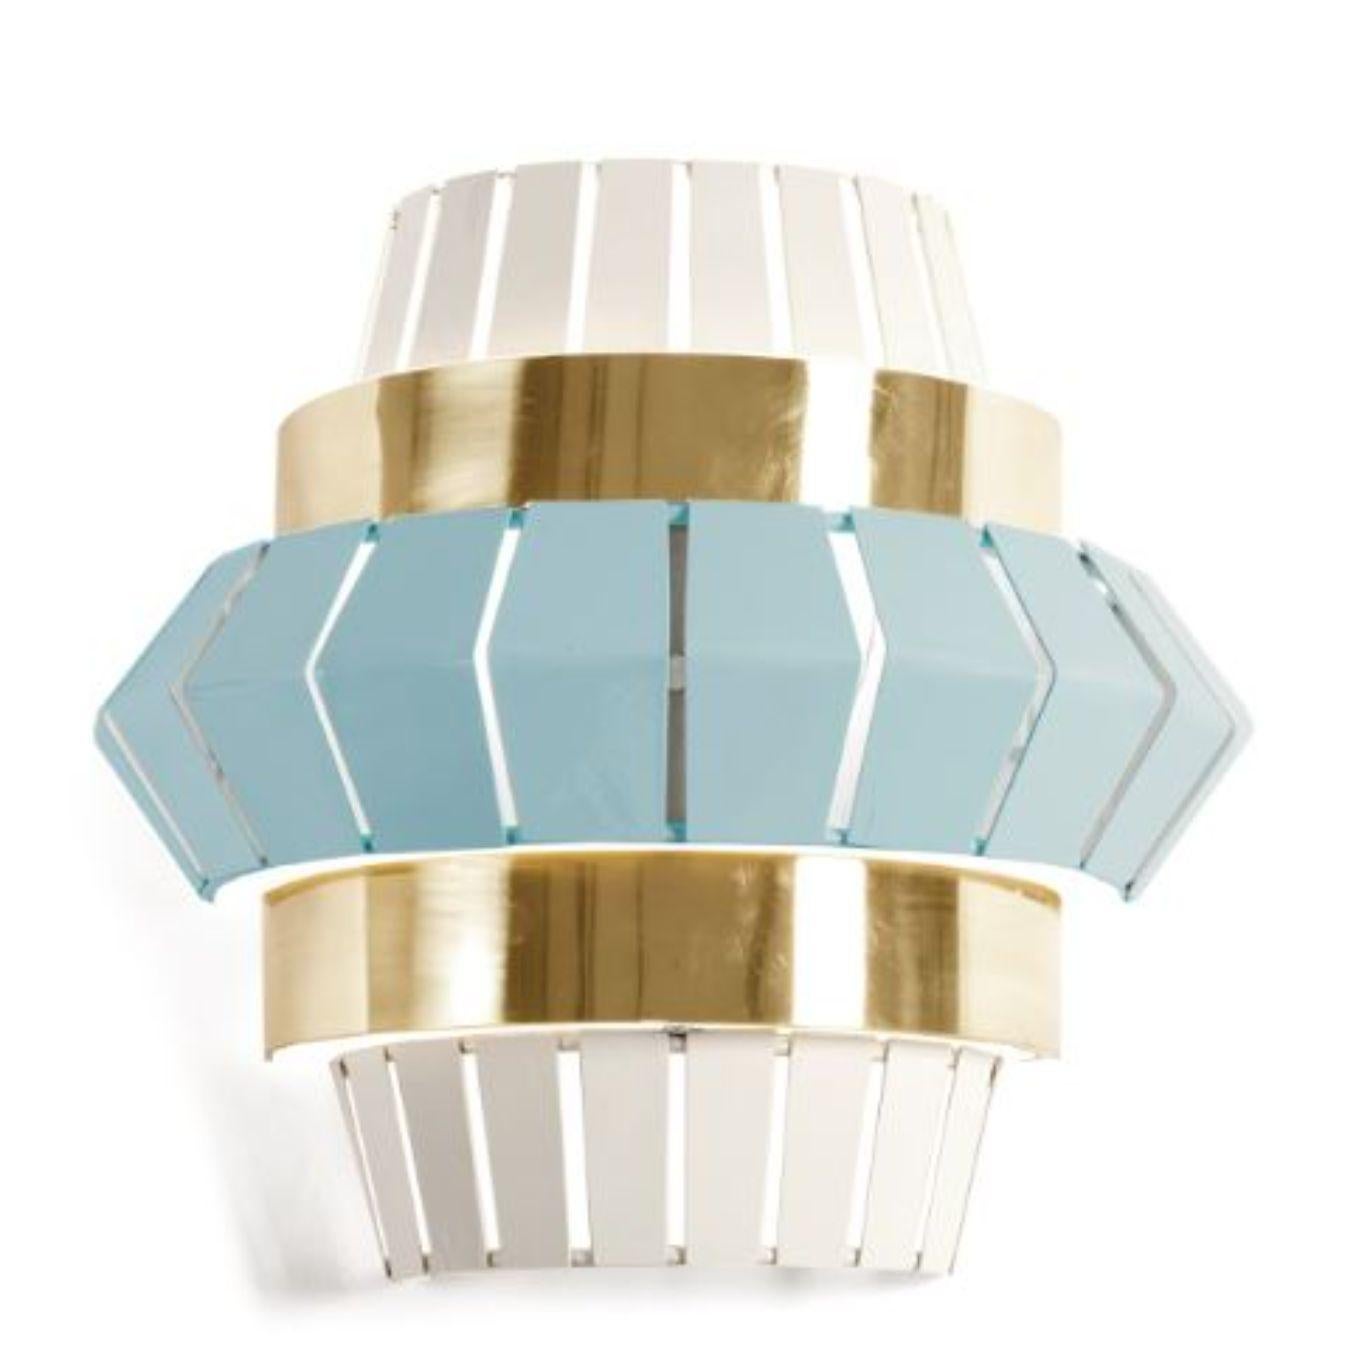 Jade andivory comb wall lamp with brass ring by Dooq
Dimensions: W 37 x D 13 x H 34 cm
Materials: lacquered metal, polished brass.
Also available in different colors and materials.

Information:
230V/50Hz
E14/1x20W LED
120V/60Hz
E12/1x15W LED
bulb